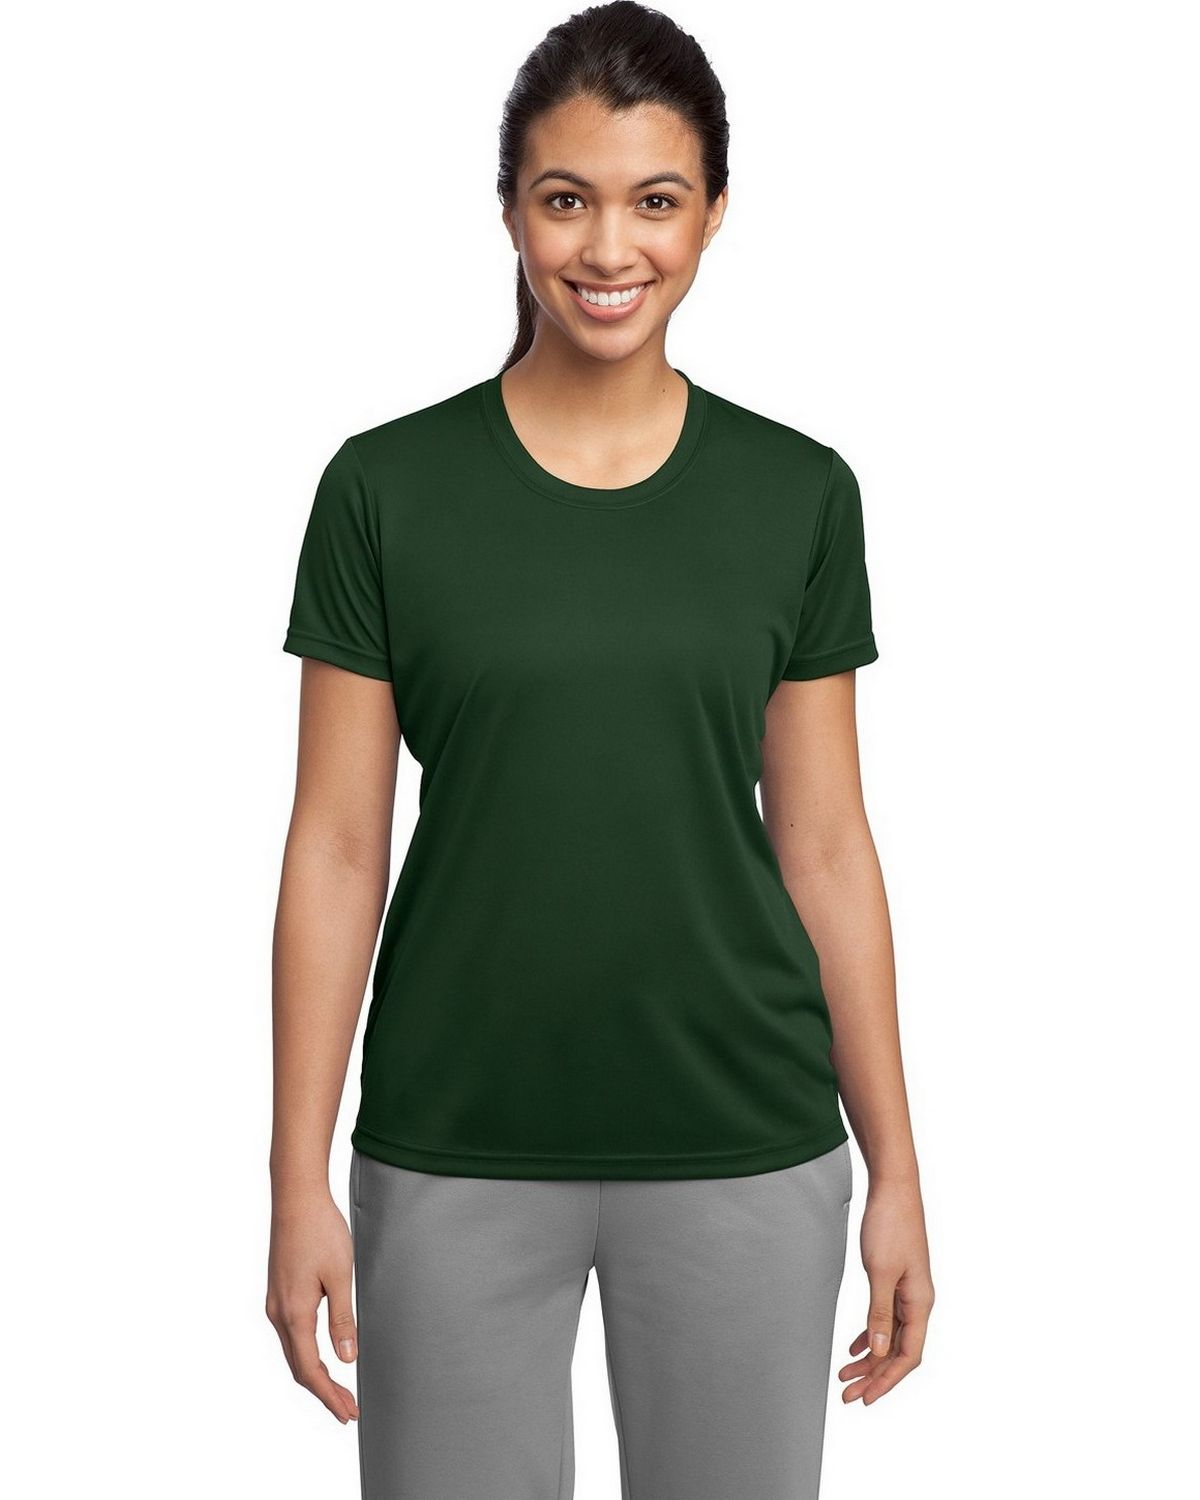 Sport-Tek LST350 Ladies Competitor Tee by Port Authority - ApparelnBags.com